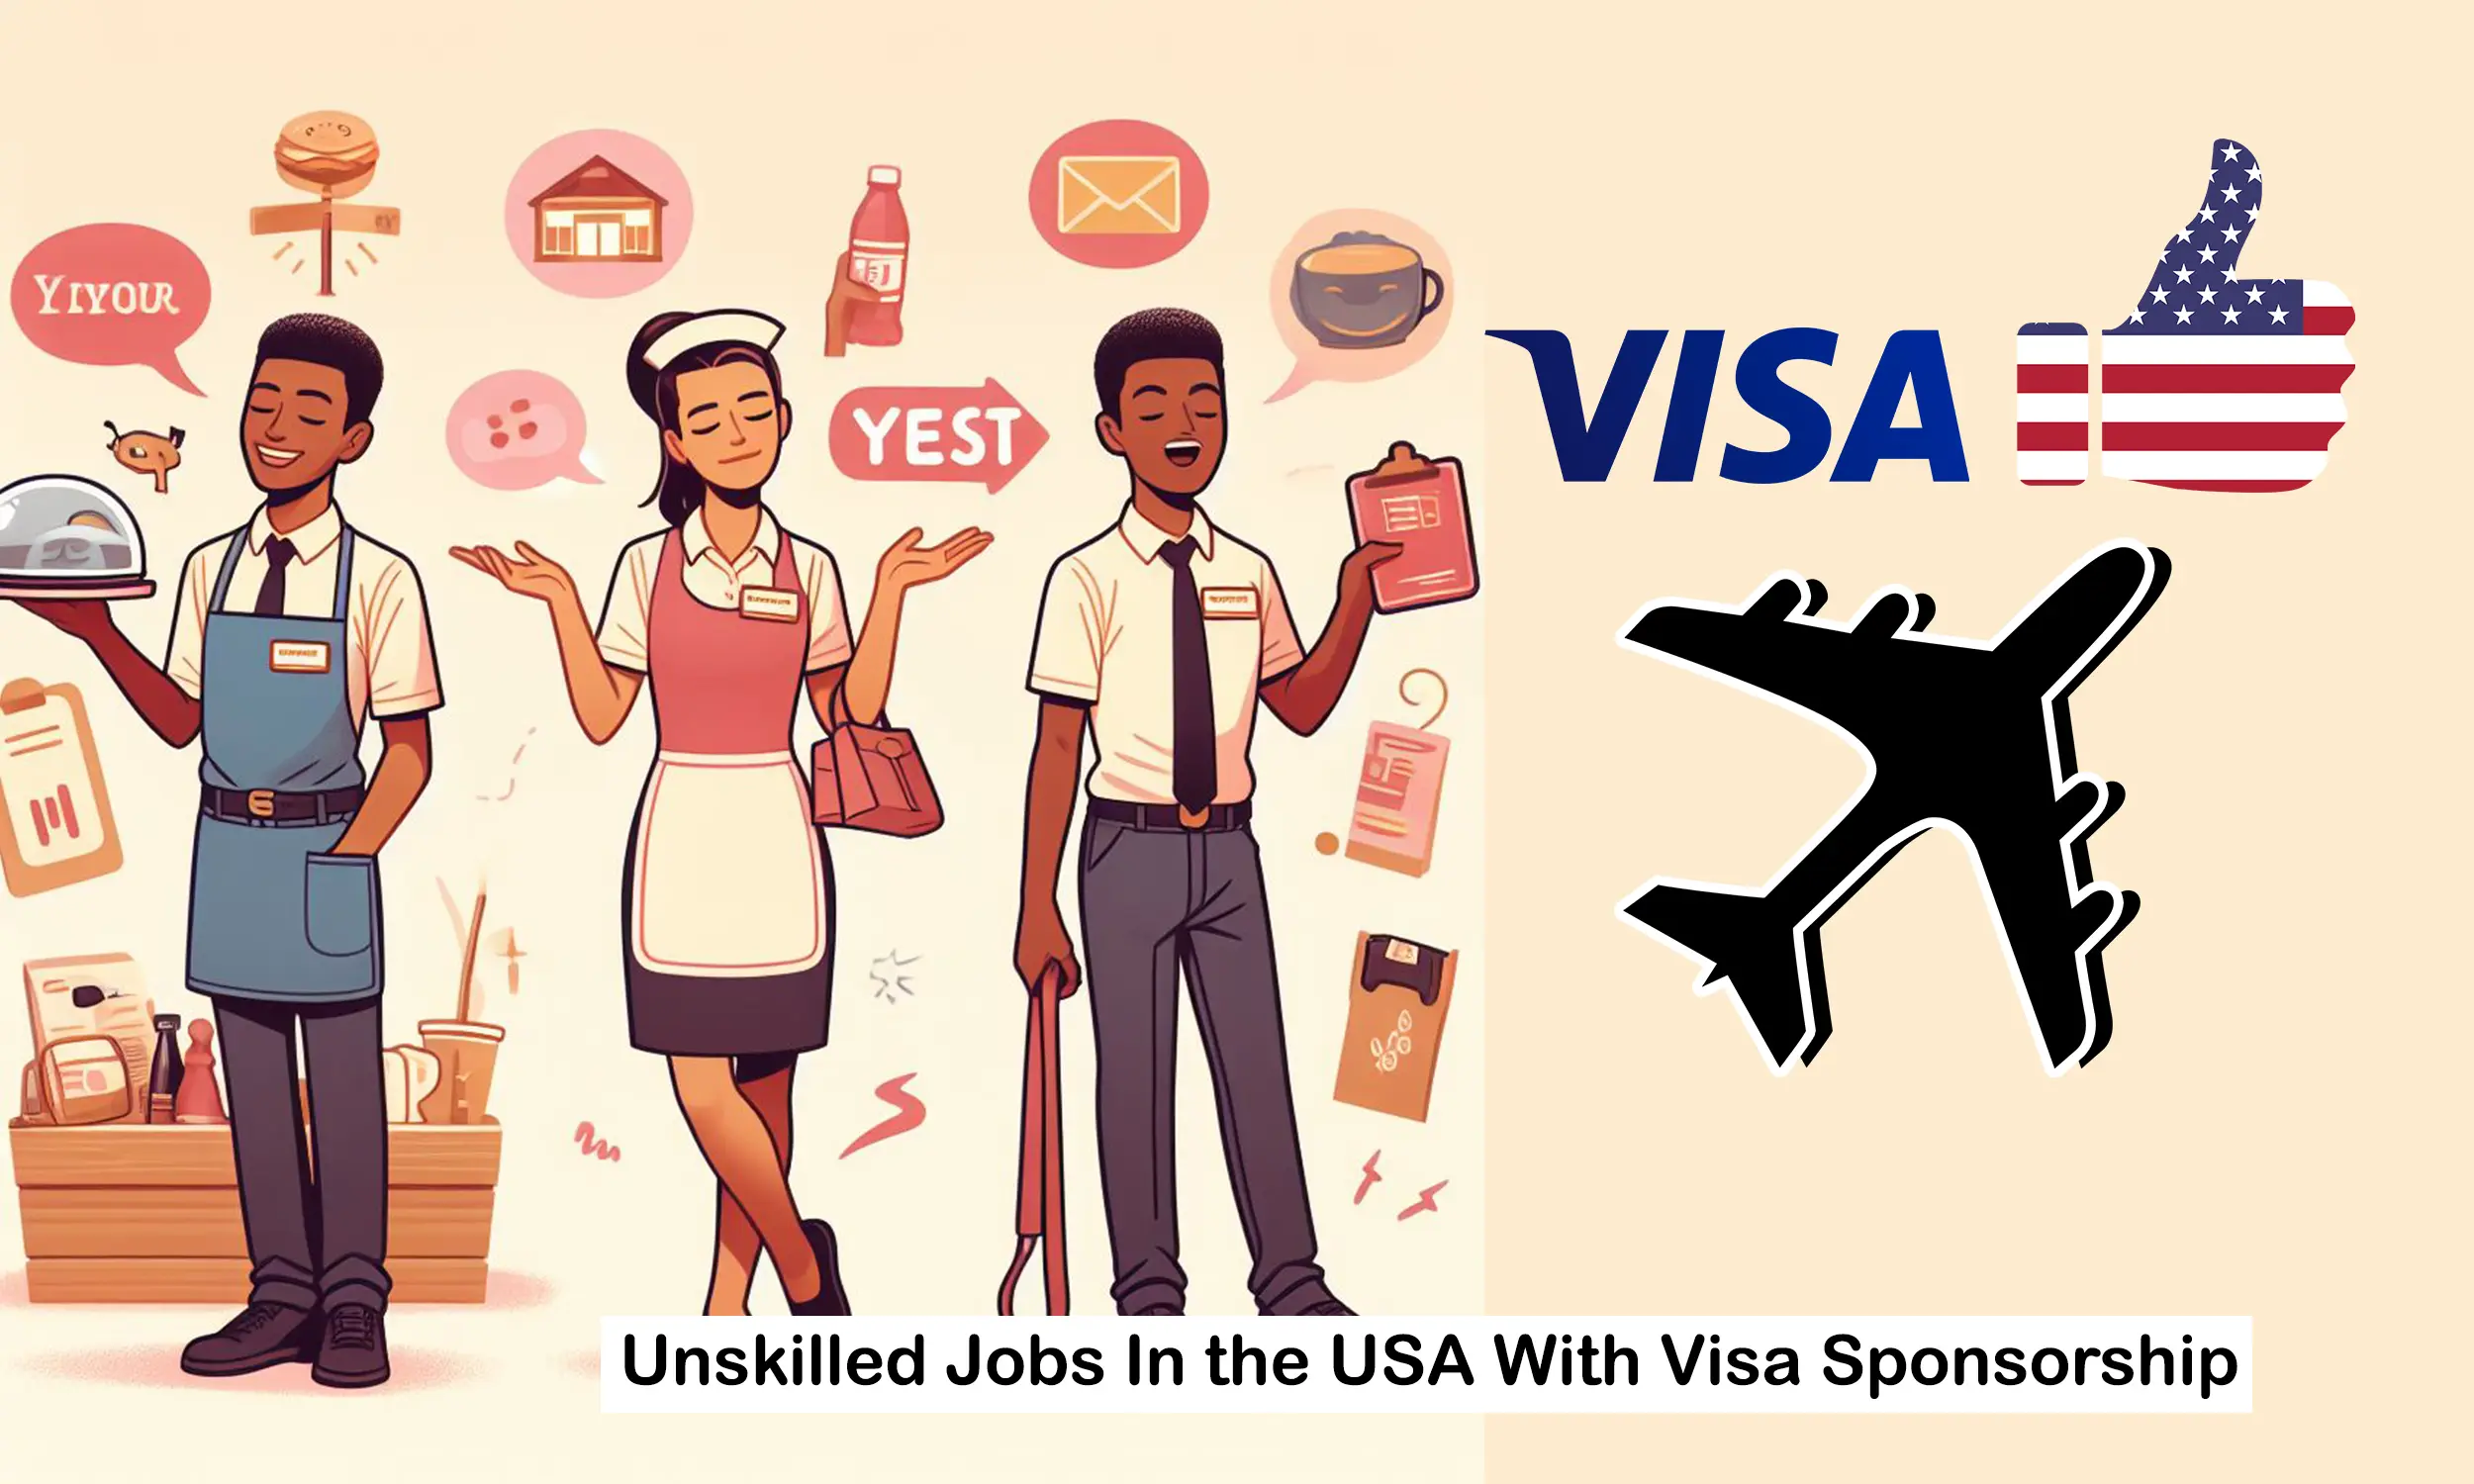 Unskilled Jobs in the USA with Visa Sponsorship